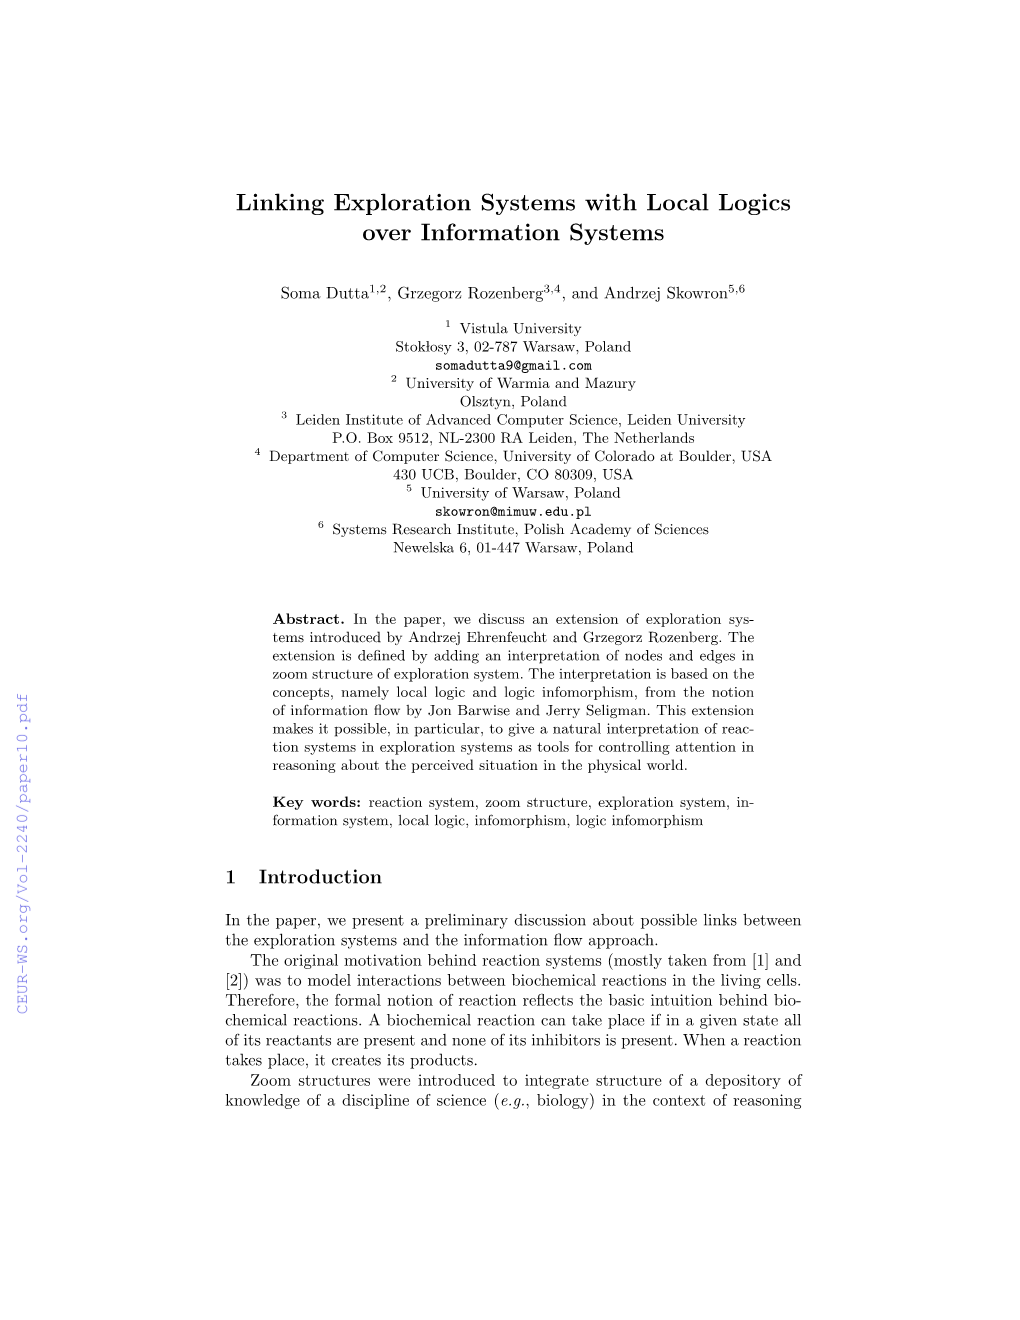 Linking Exploration Systems with Local Logics Over Information Systems